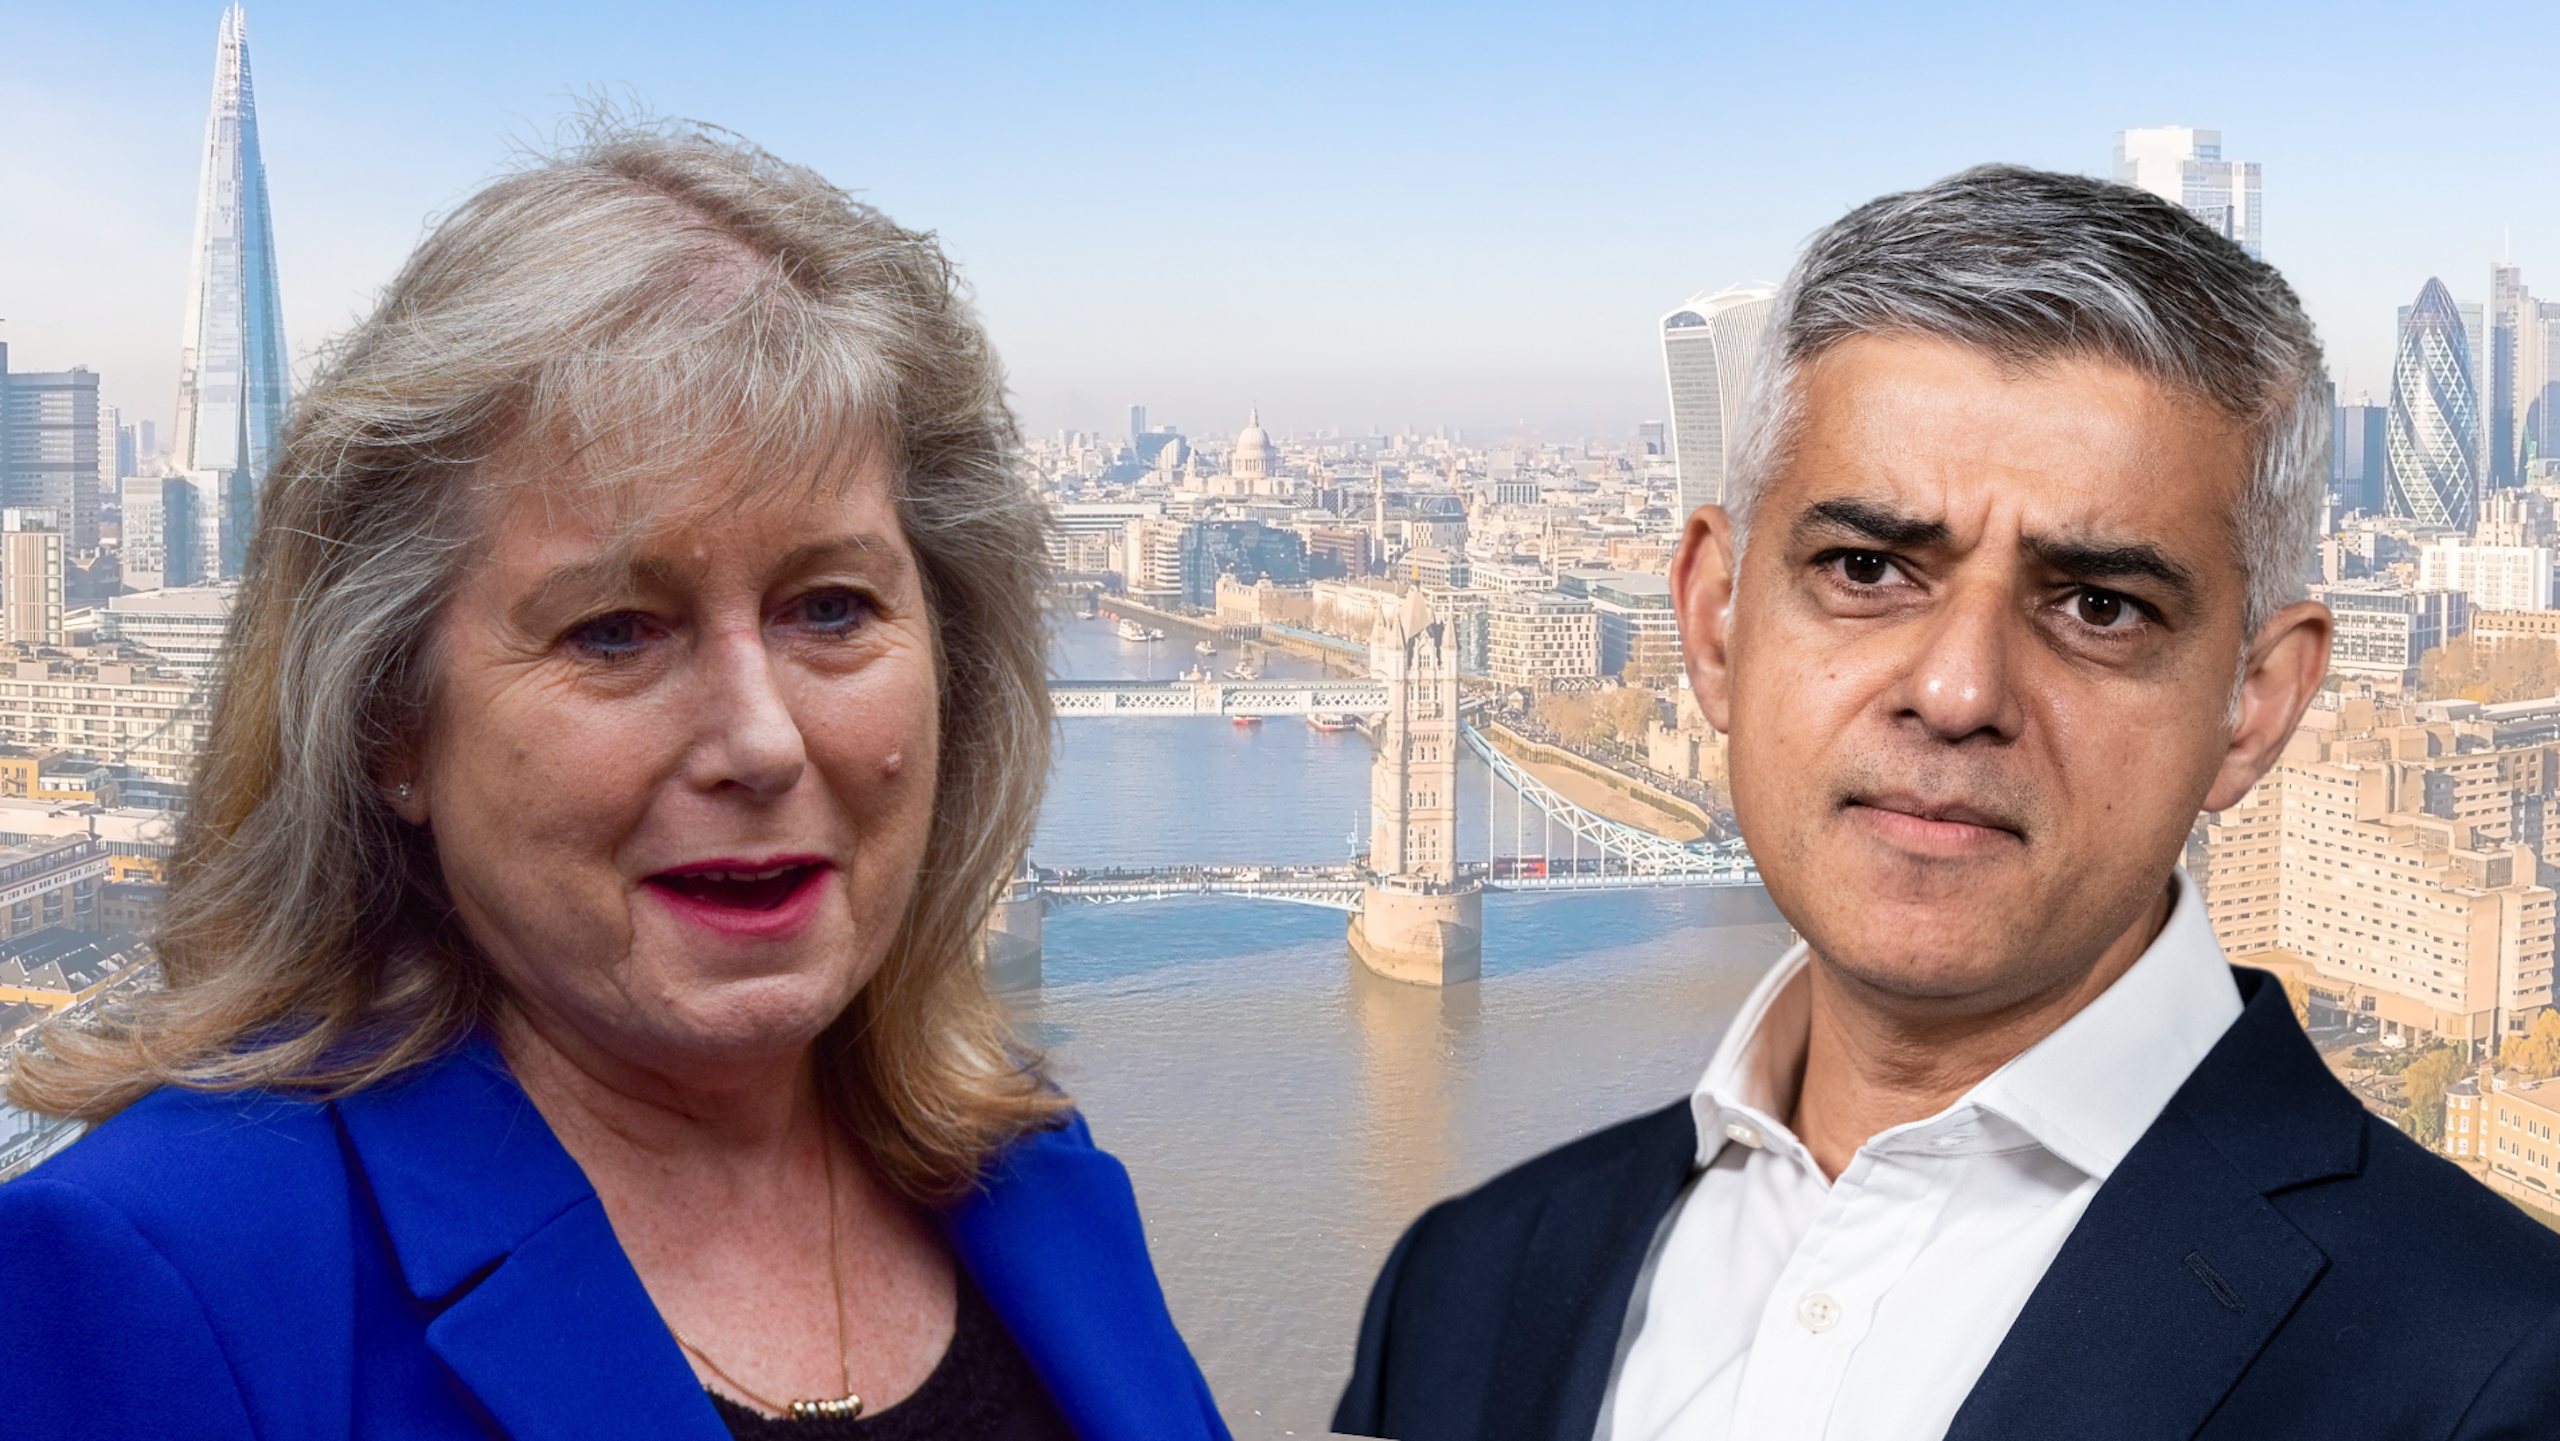 Collage of Susan Hall and Sadiq Khan facing each other with an aerial view of London in the background